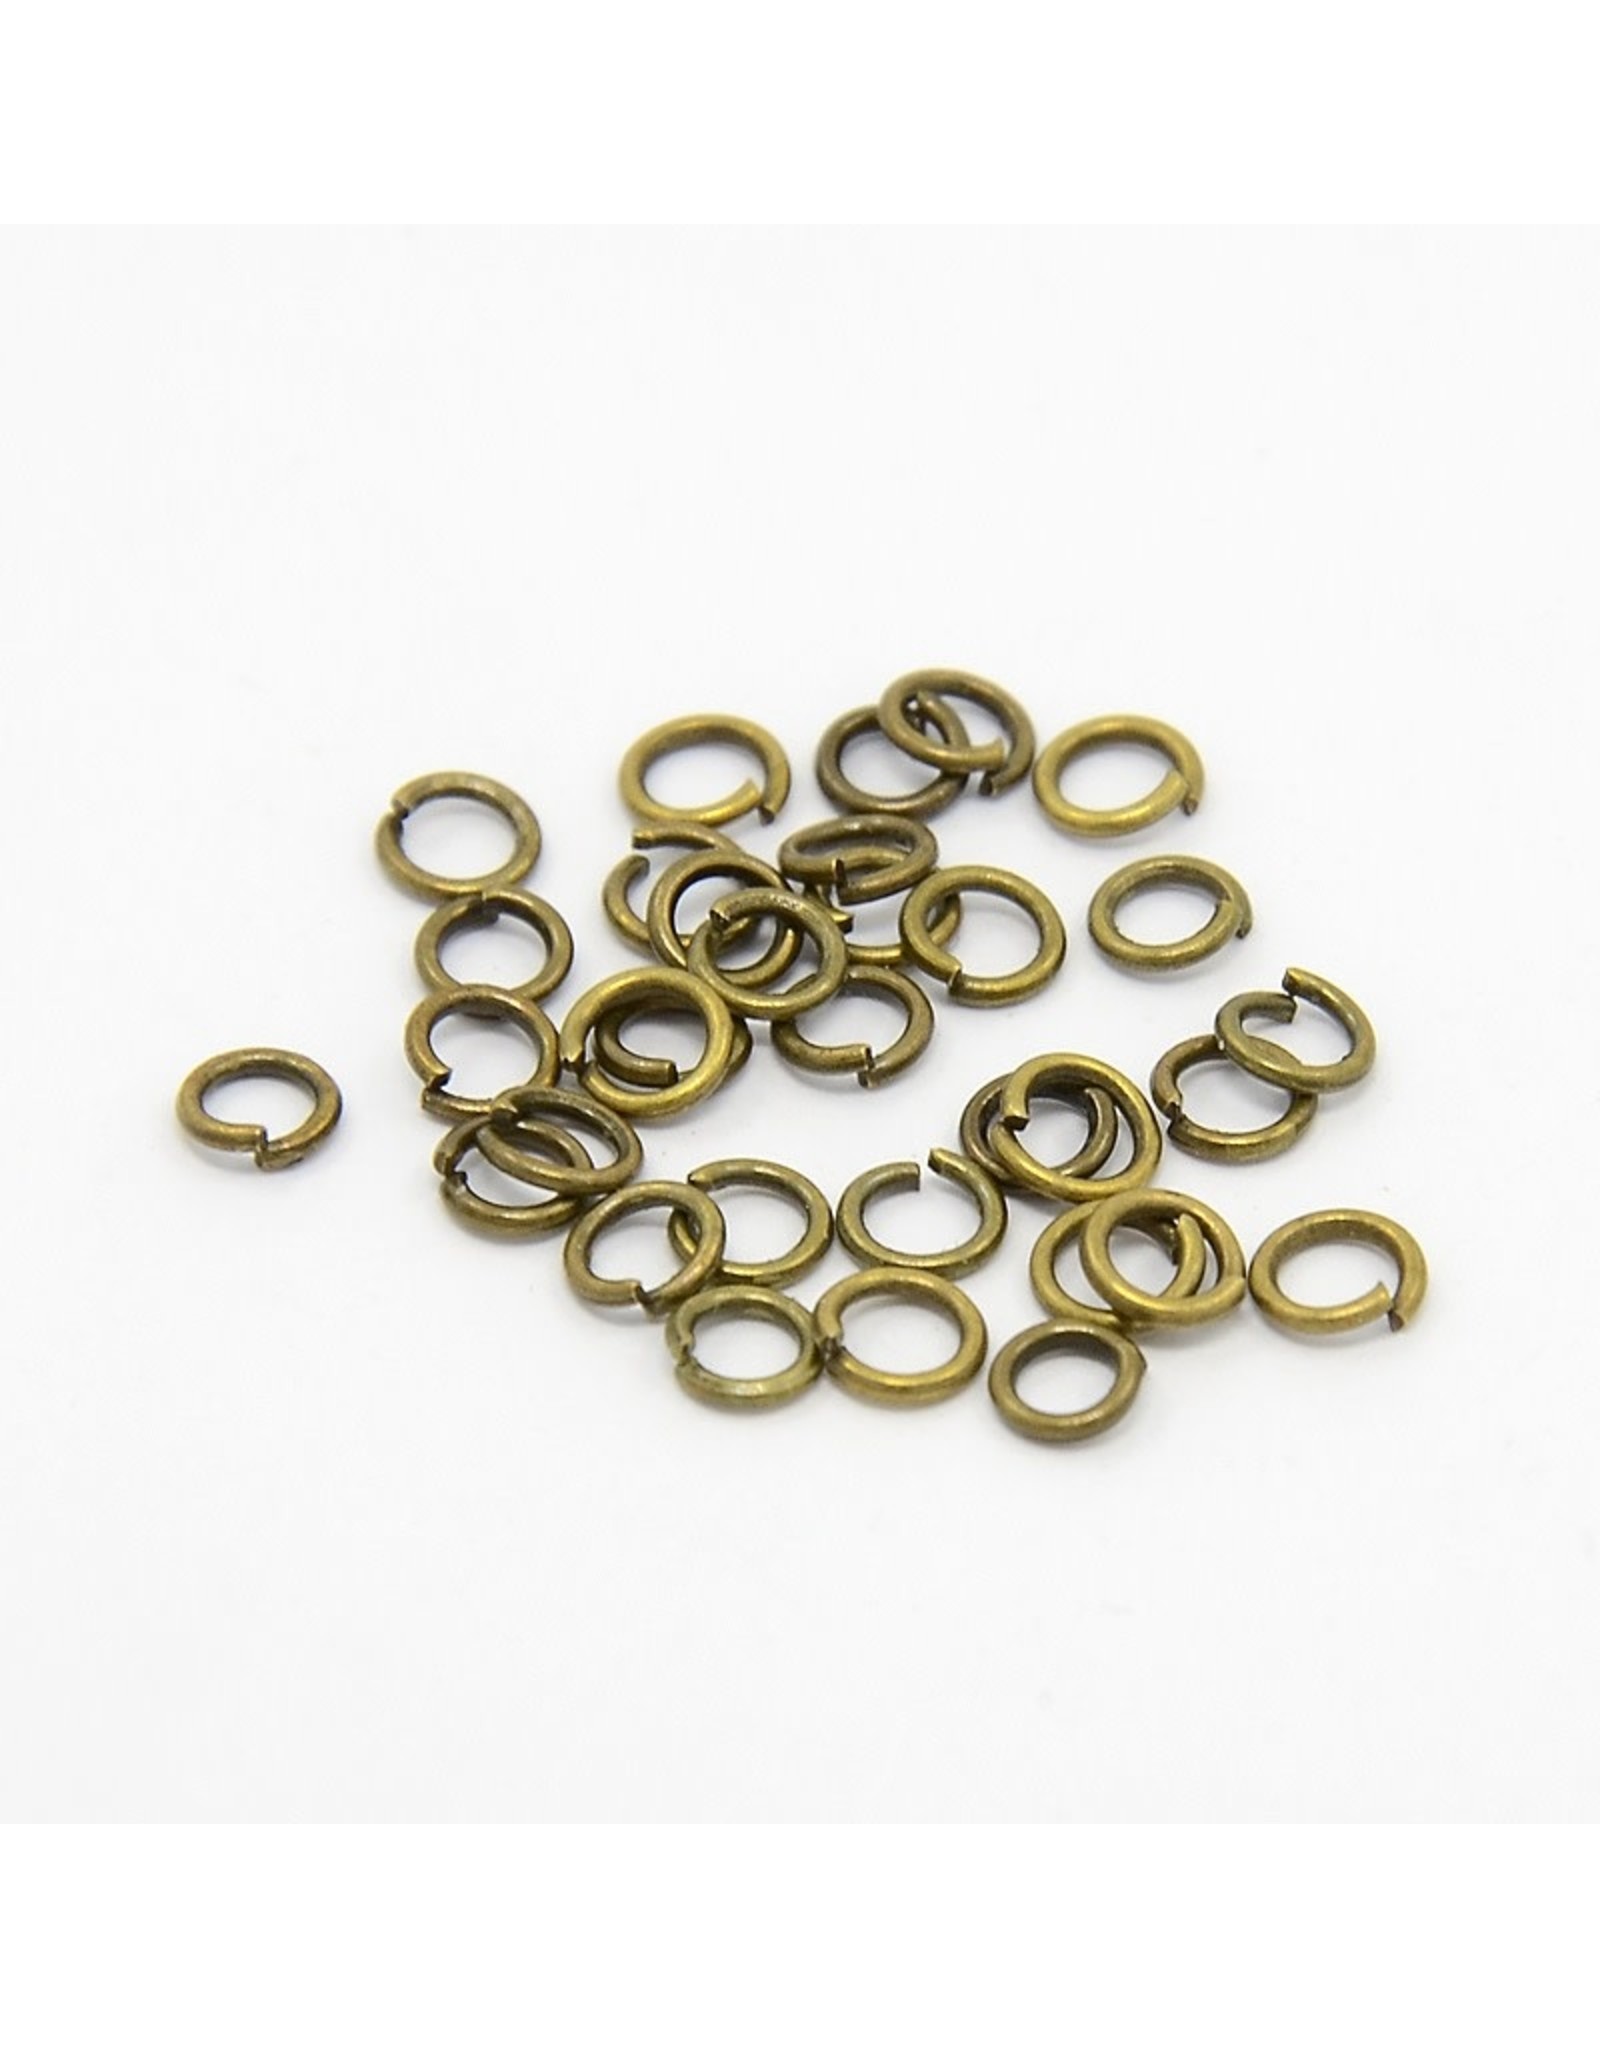 Jump Ring 4mm Antique Brass  approx 22g  x100 NF